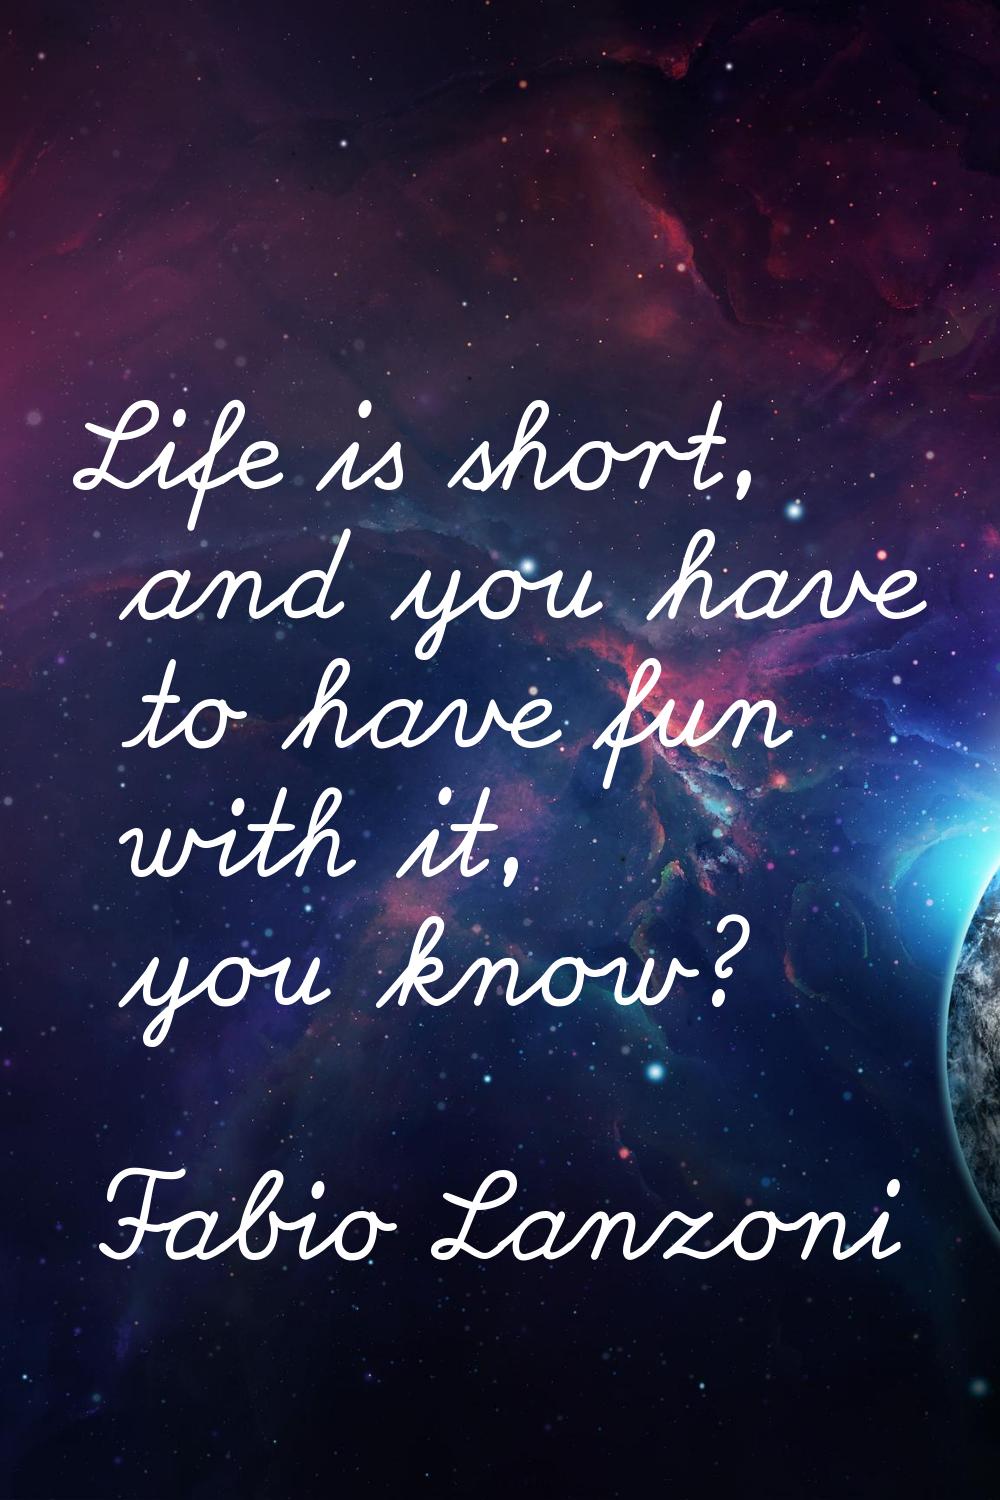 Life is short, and you have to have fun with it, you know?